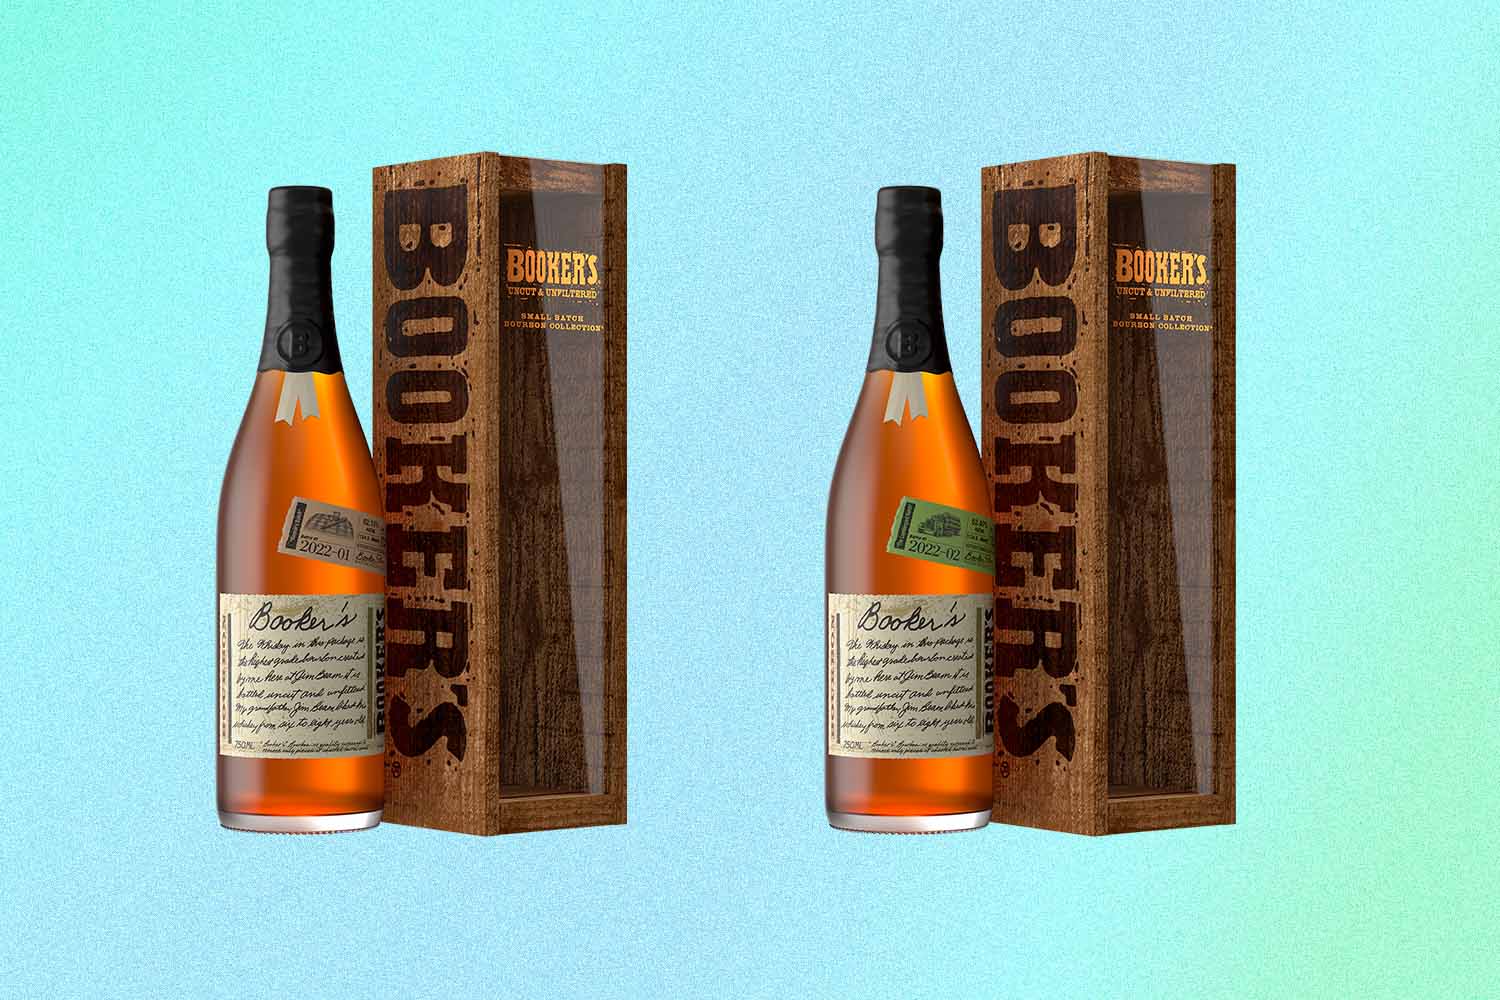 The 2022 limited-edition Booker's Bourbon releases in their packaging